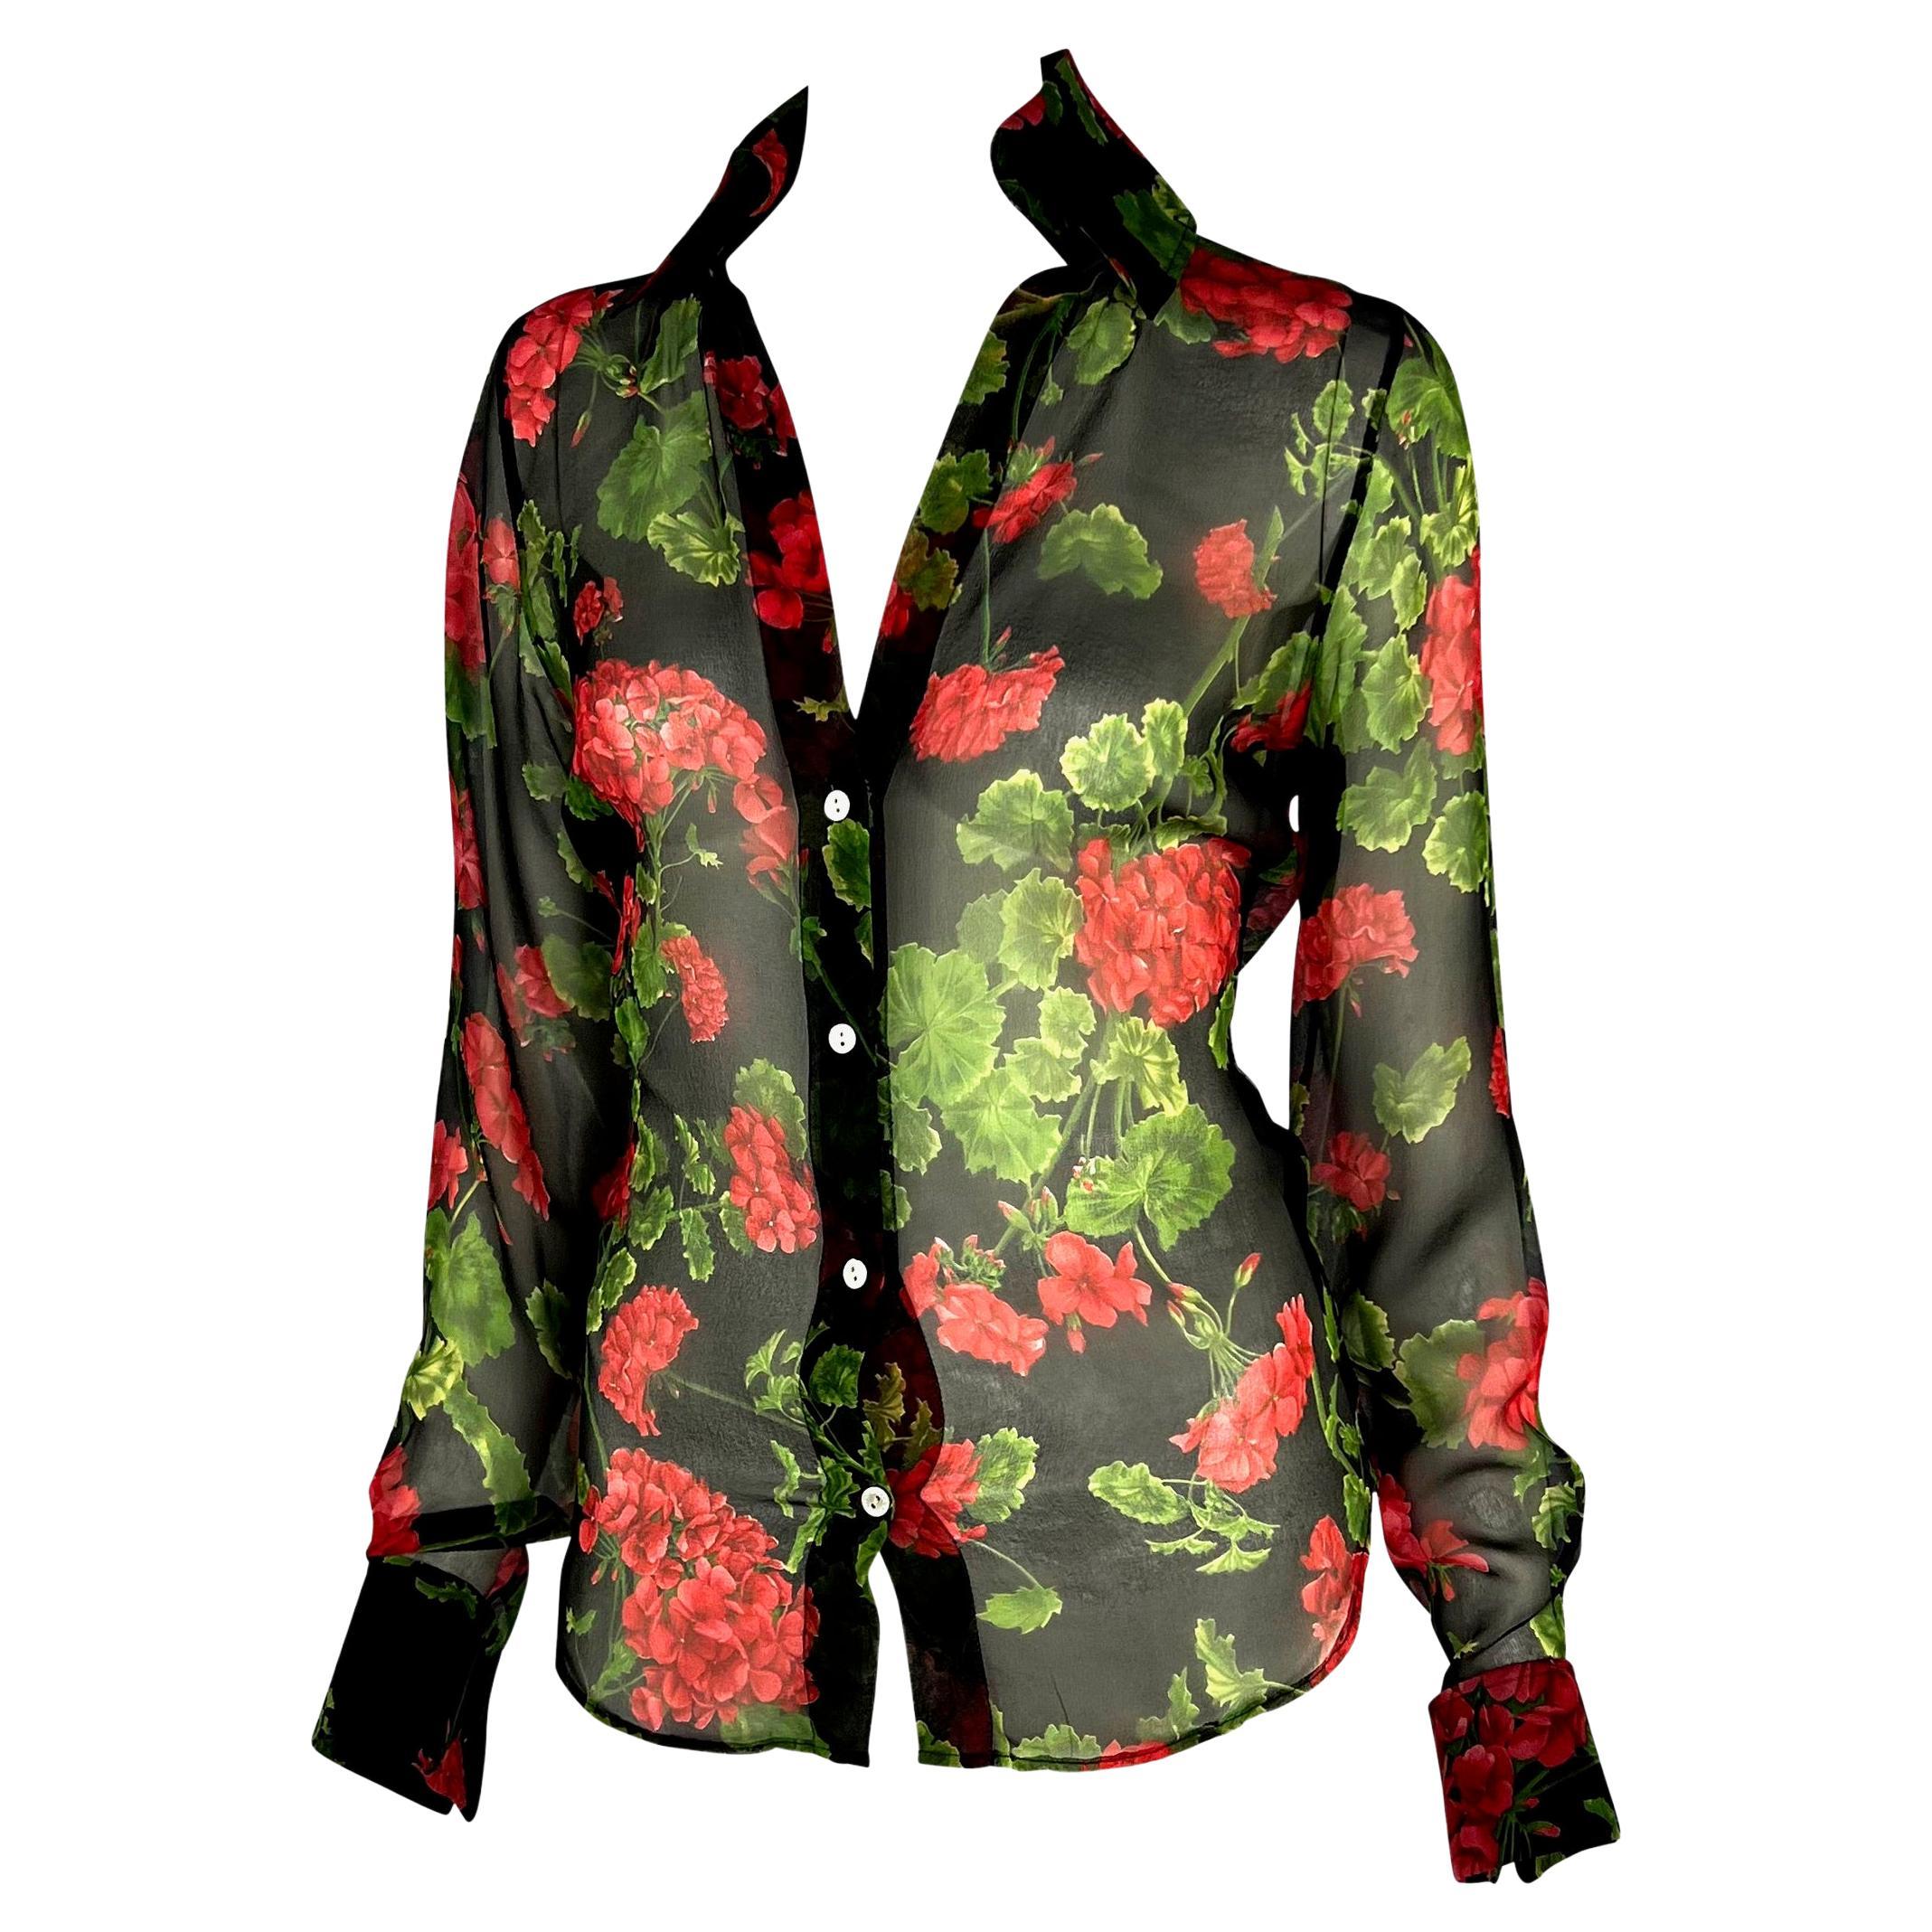 Presenting a sheer floral Dolce and Gabbana button-down shirt. From the Spring/Summer 2000 collection, this semi-sheer shirt is covered in red hydrangeas with a black background. The top has a plunging neckline and only buttons about halfway up and